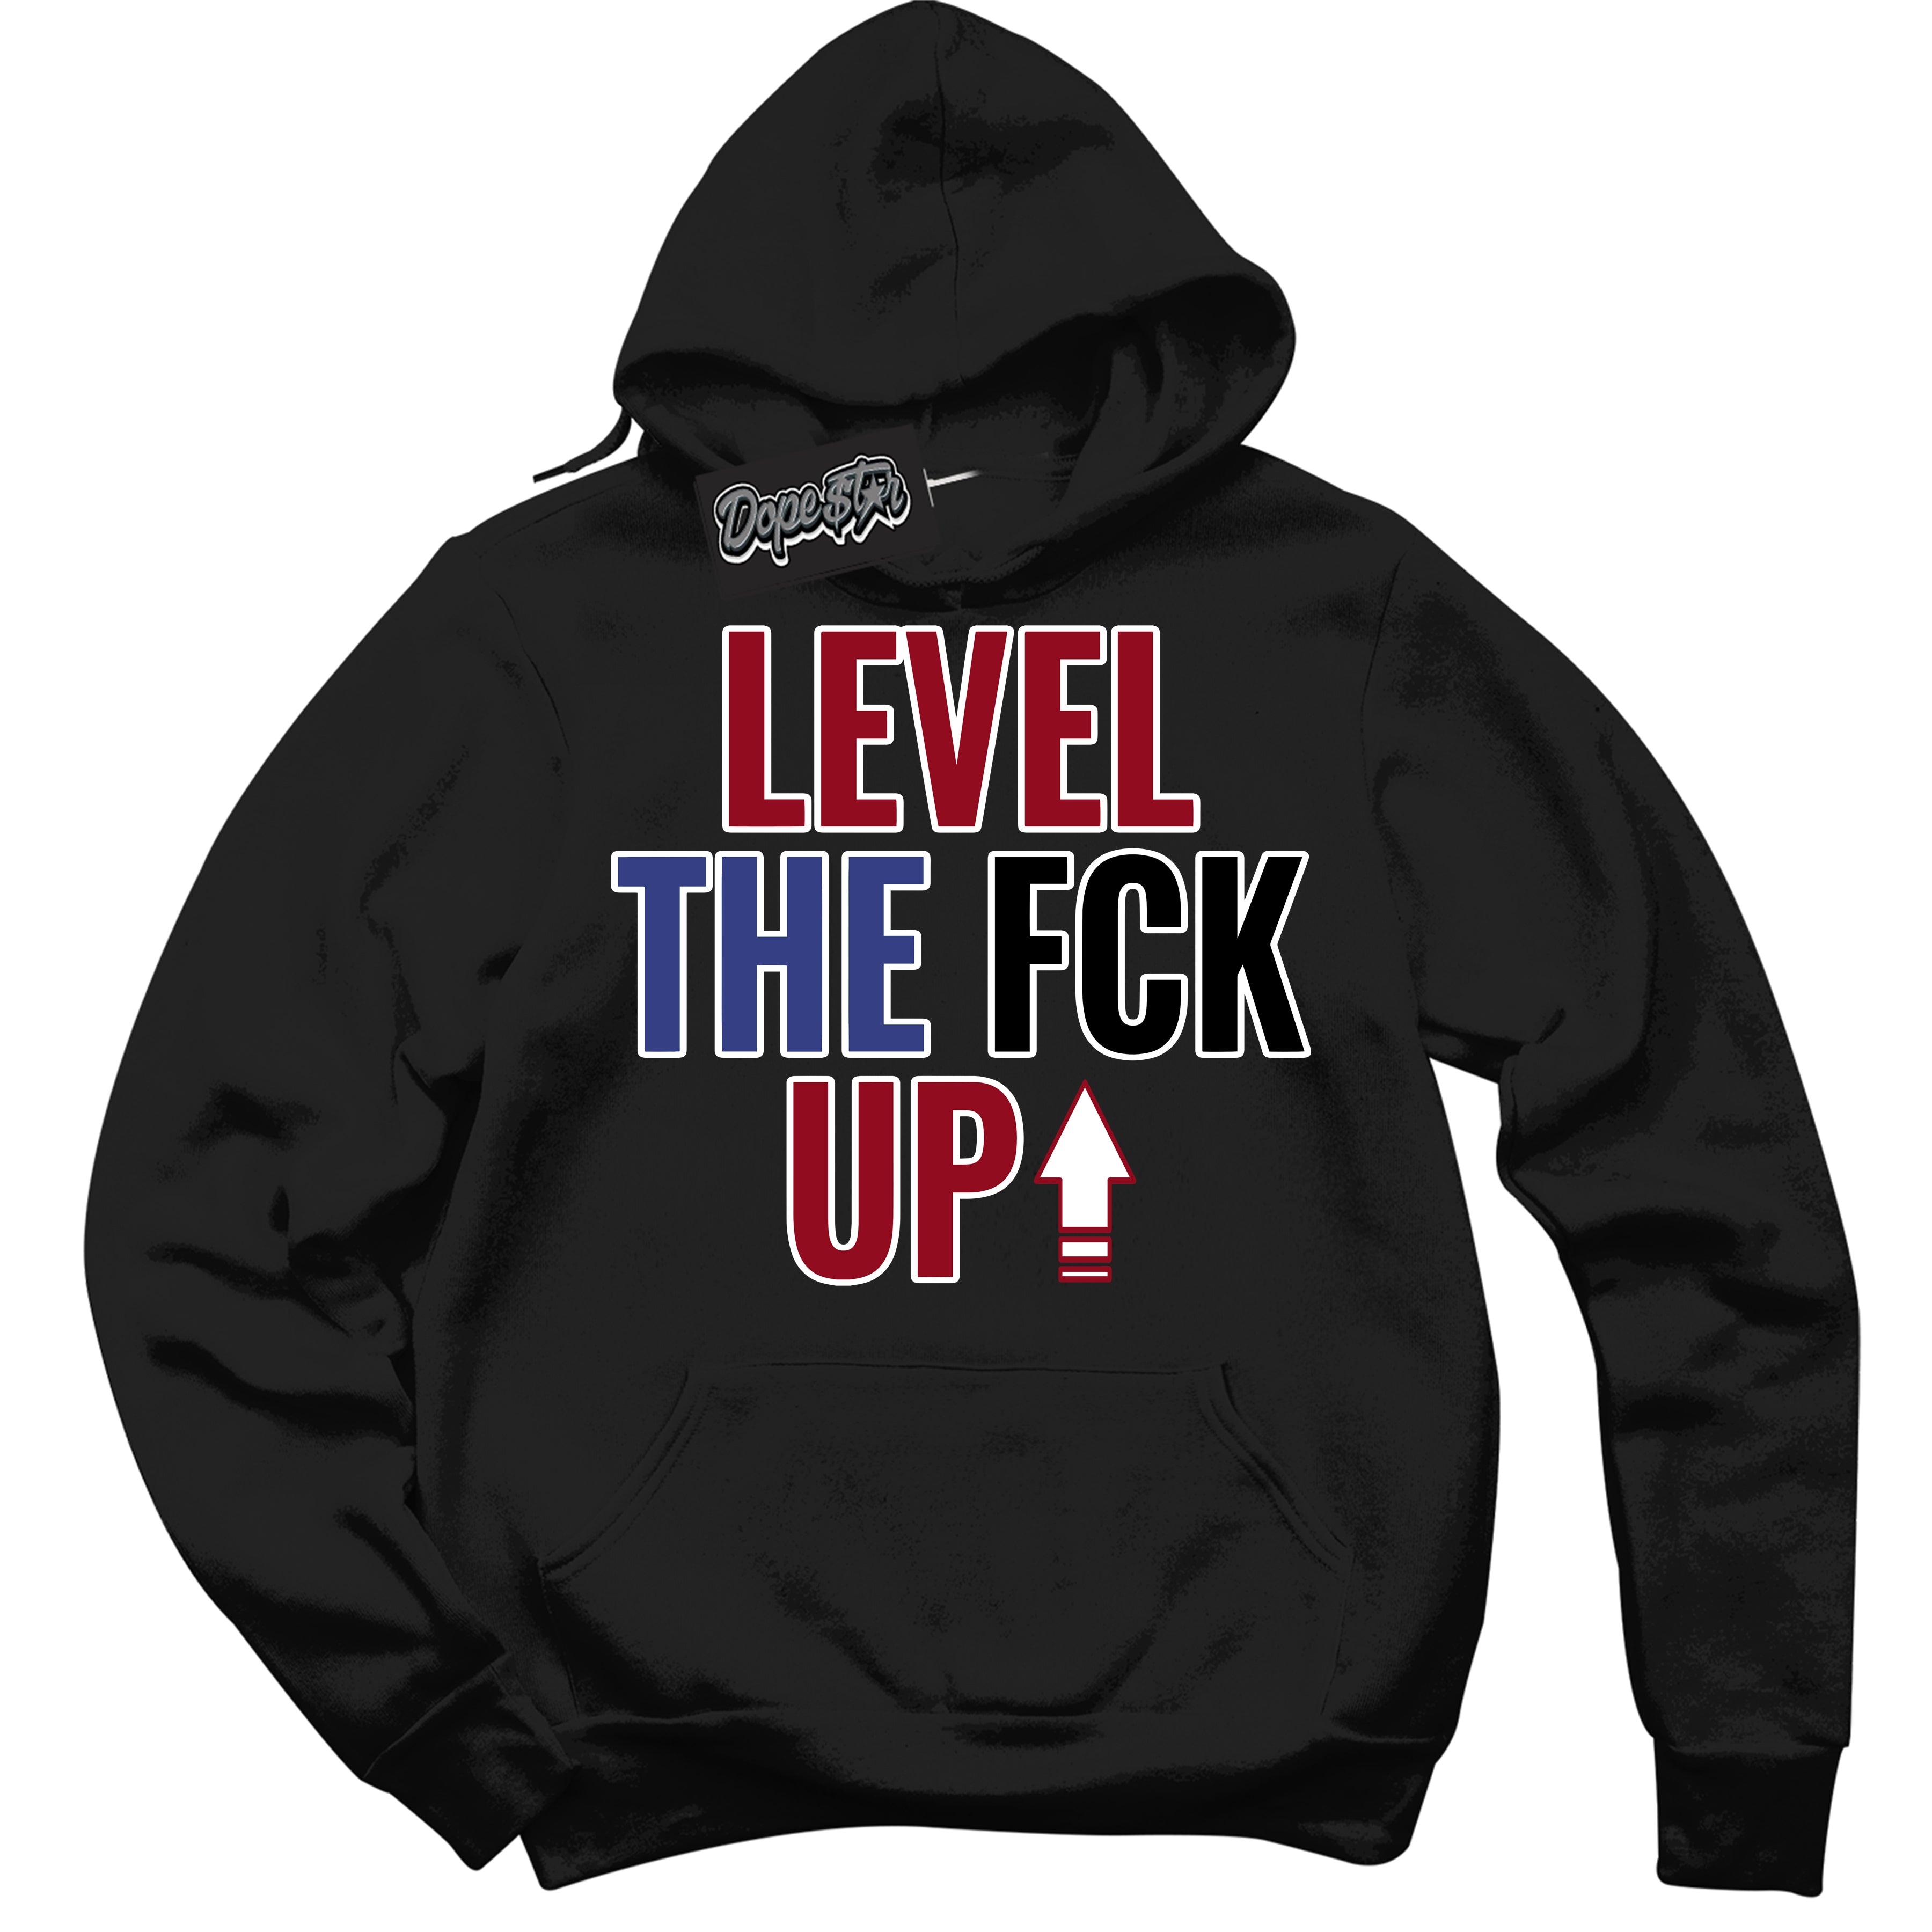 Cool Black Hoodie with “ Level The Fck Up ”  design that Perfectly Matches Playoffs 8s Sneakers.